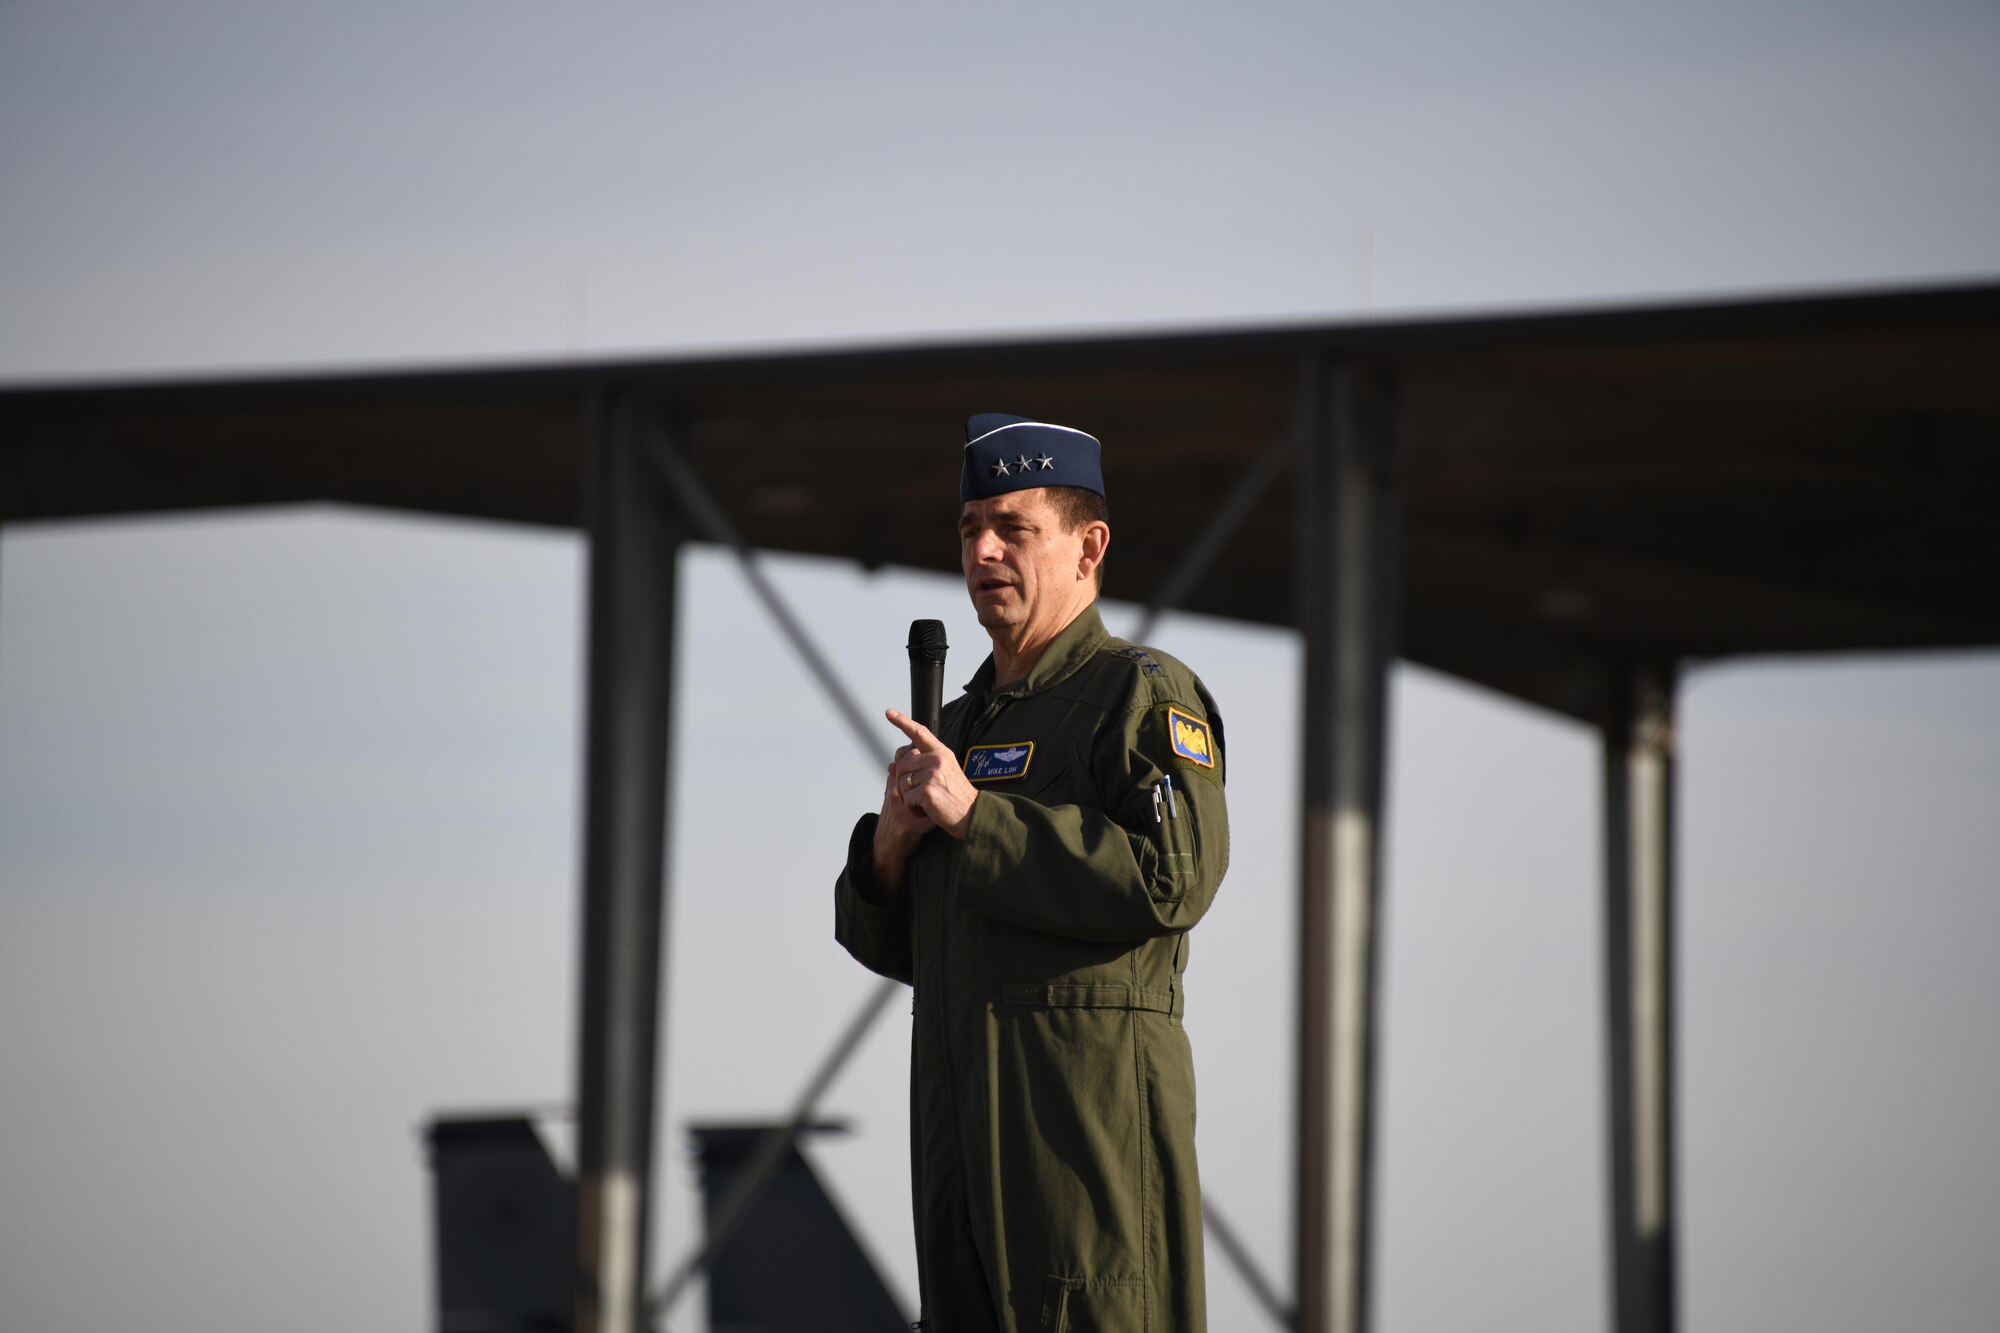 A man wearing a green military flightsuit speaks into a microphone